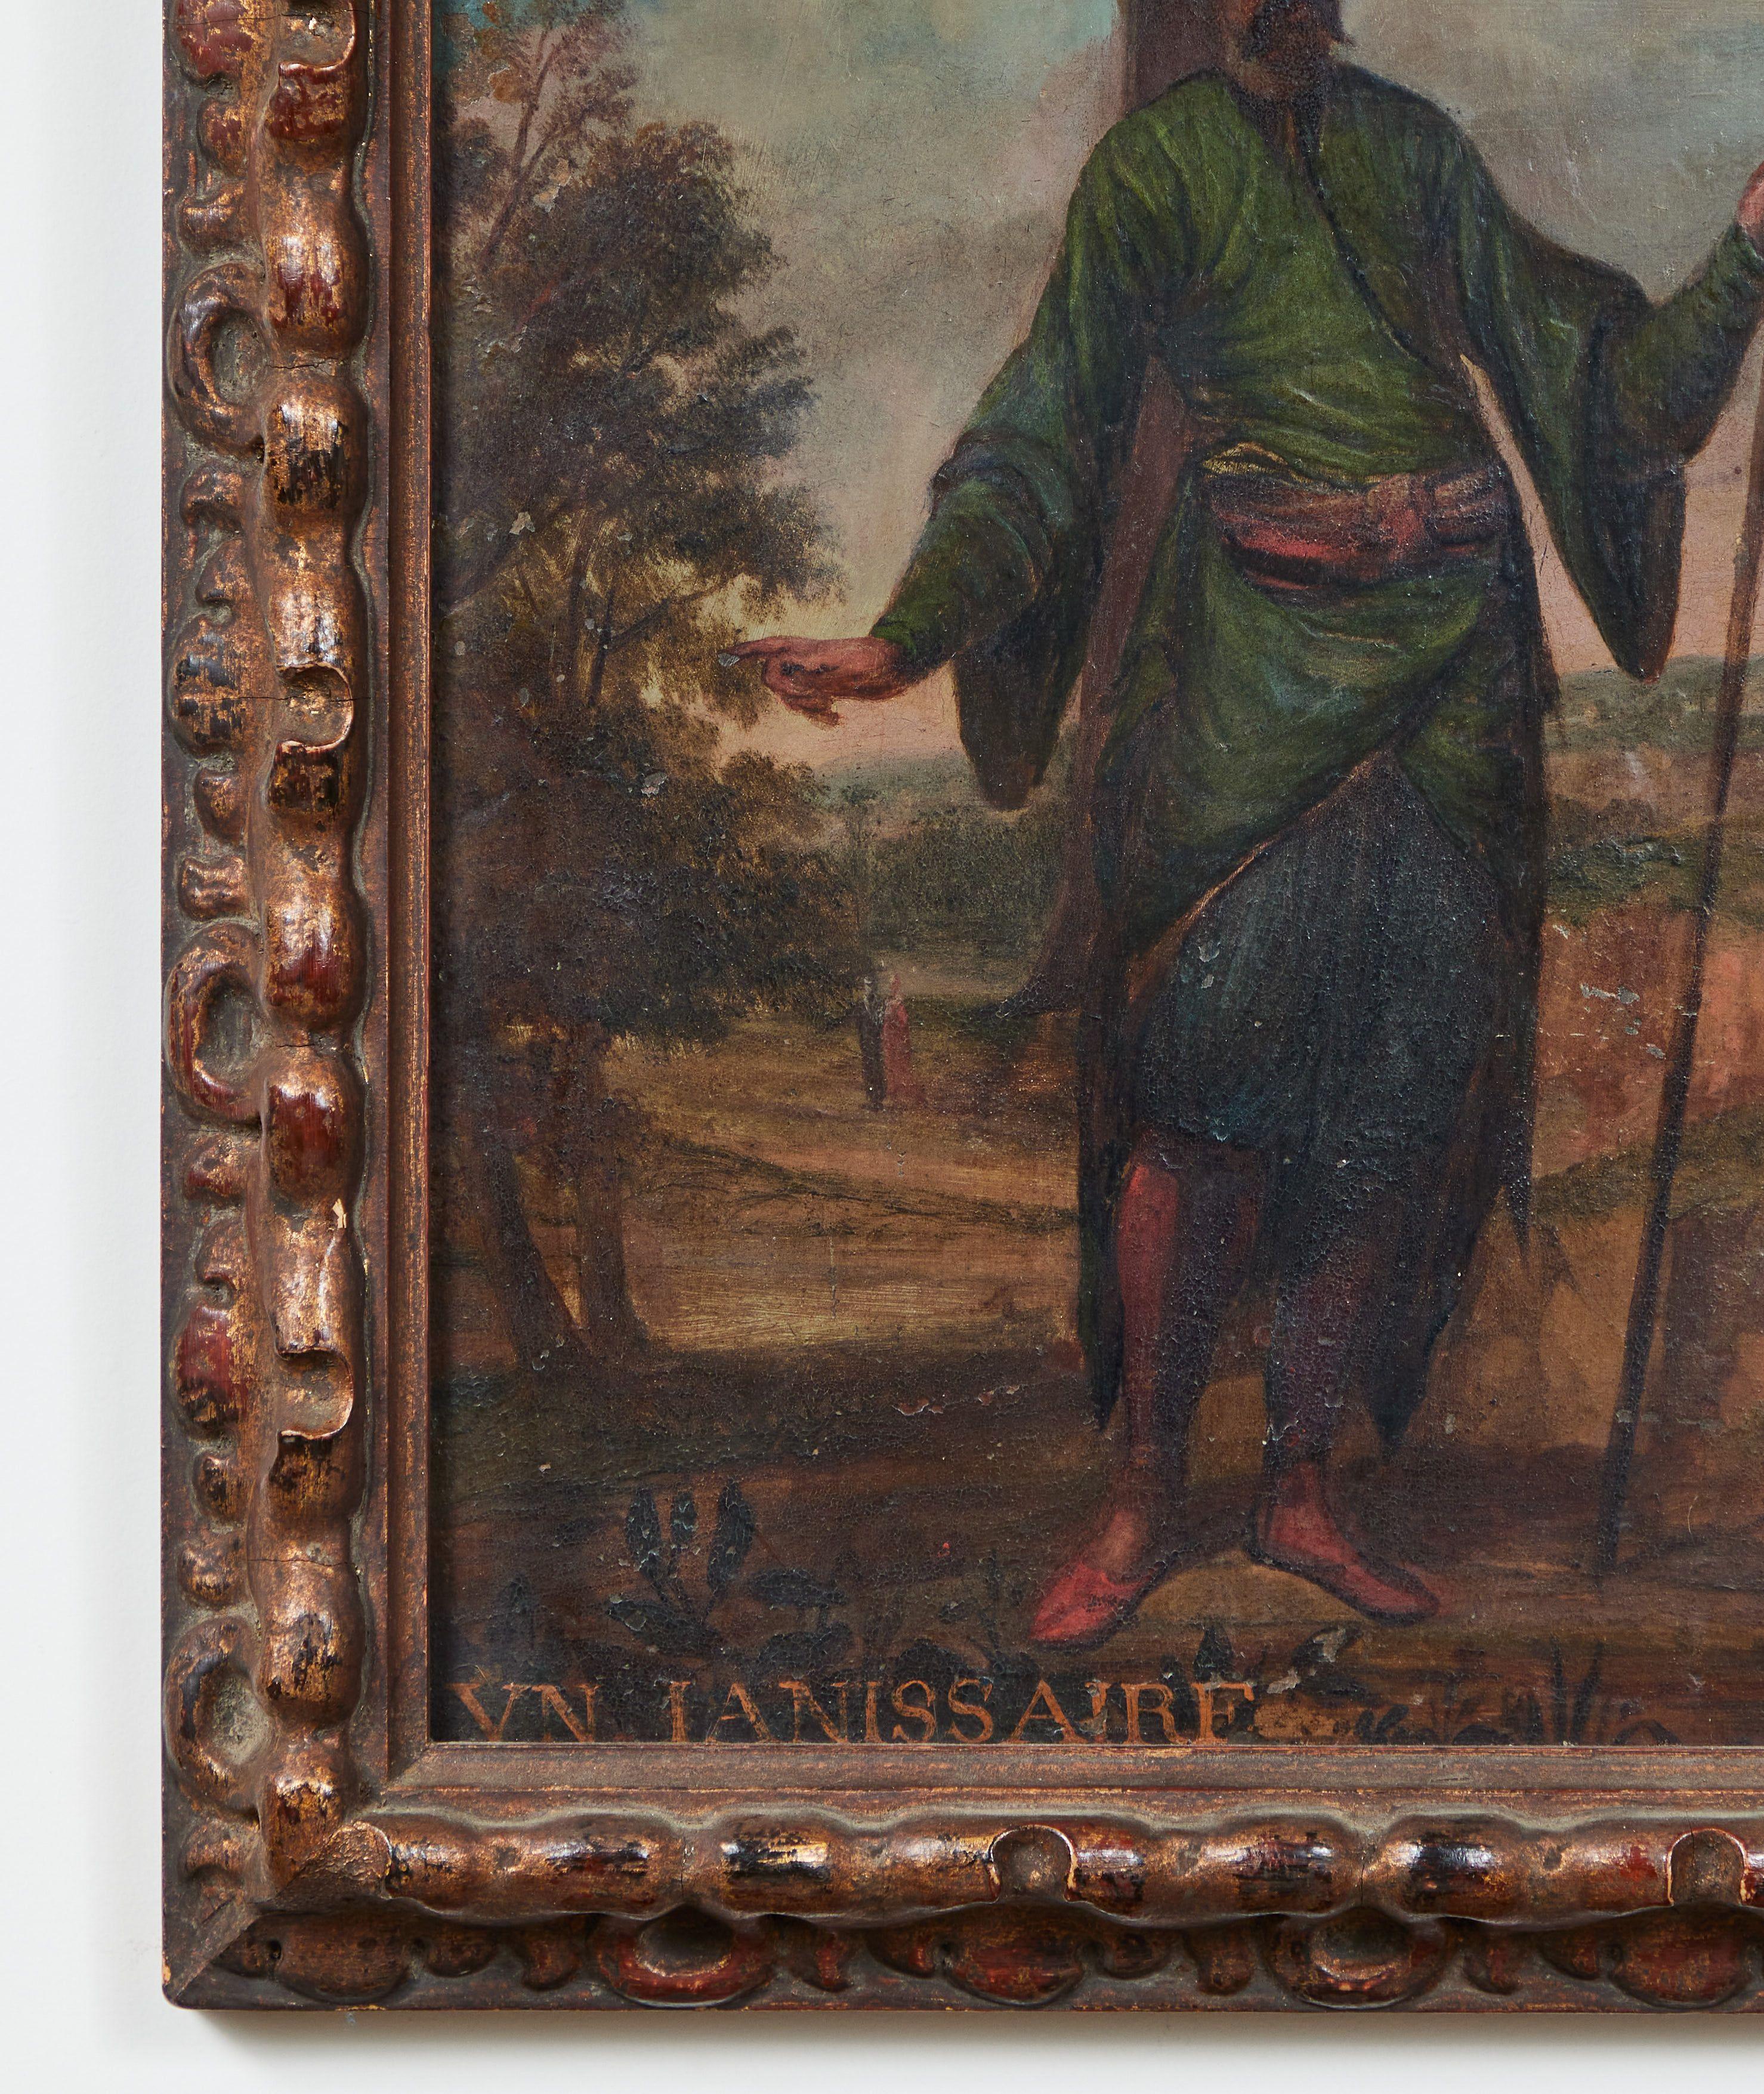 Hand-Painted 18th Century Paintings of Ottoman Empire Figures